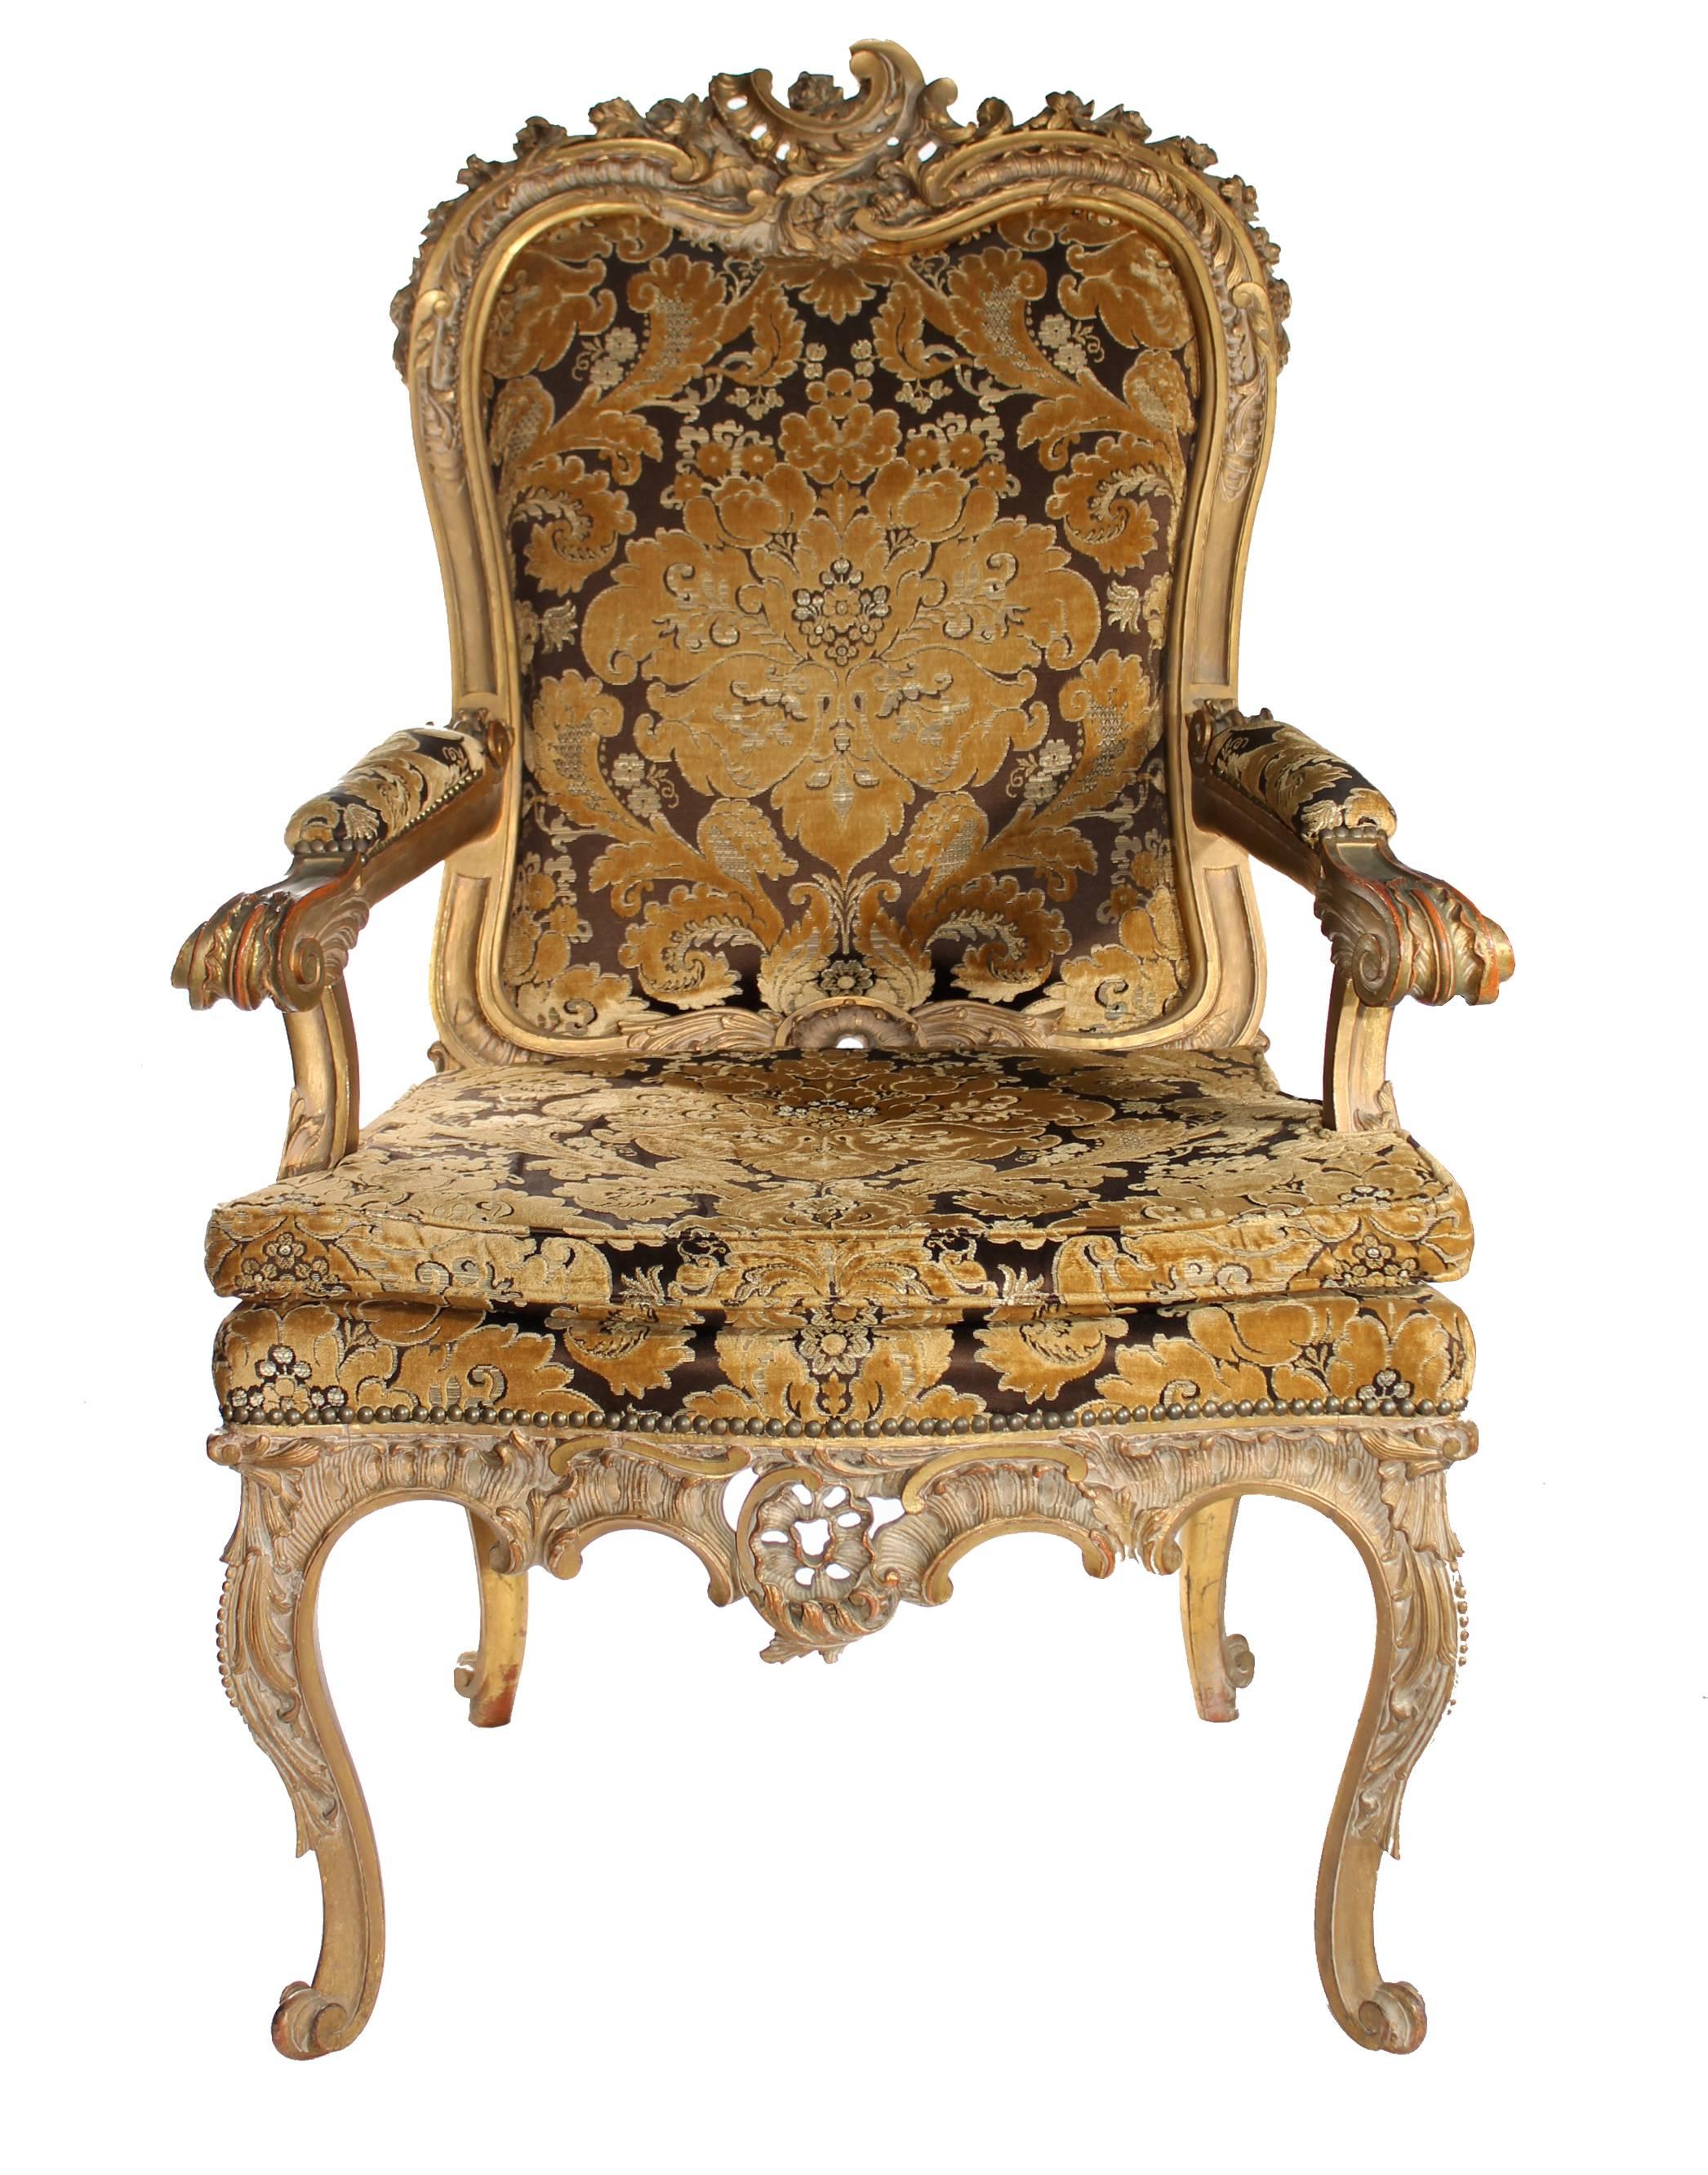 French baroque style hand carved fruitwood armchair with typical neoclassical rock and plant decorations, gold leaf gilded and painted over in additional colors. Upholstered in golden and brown flower pattern velvet.
   